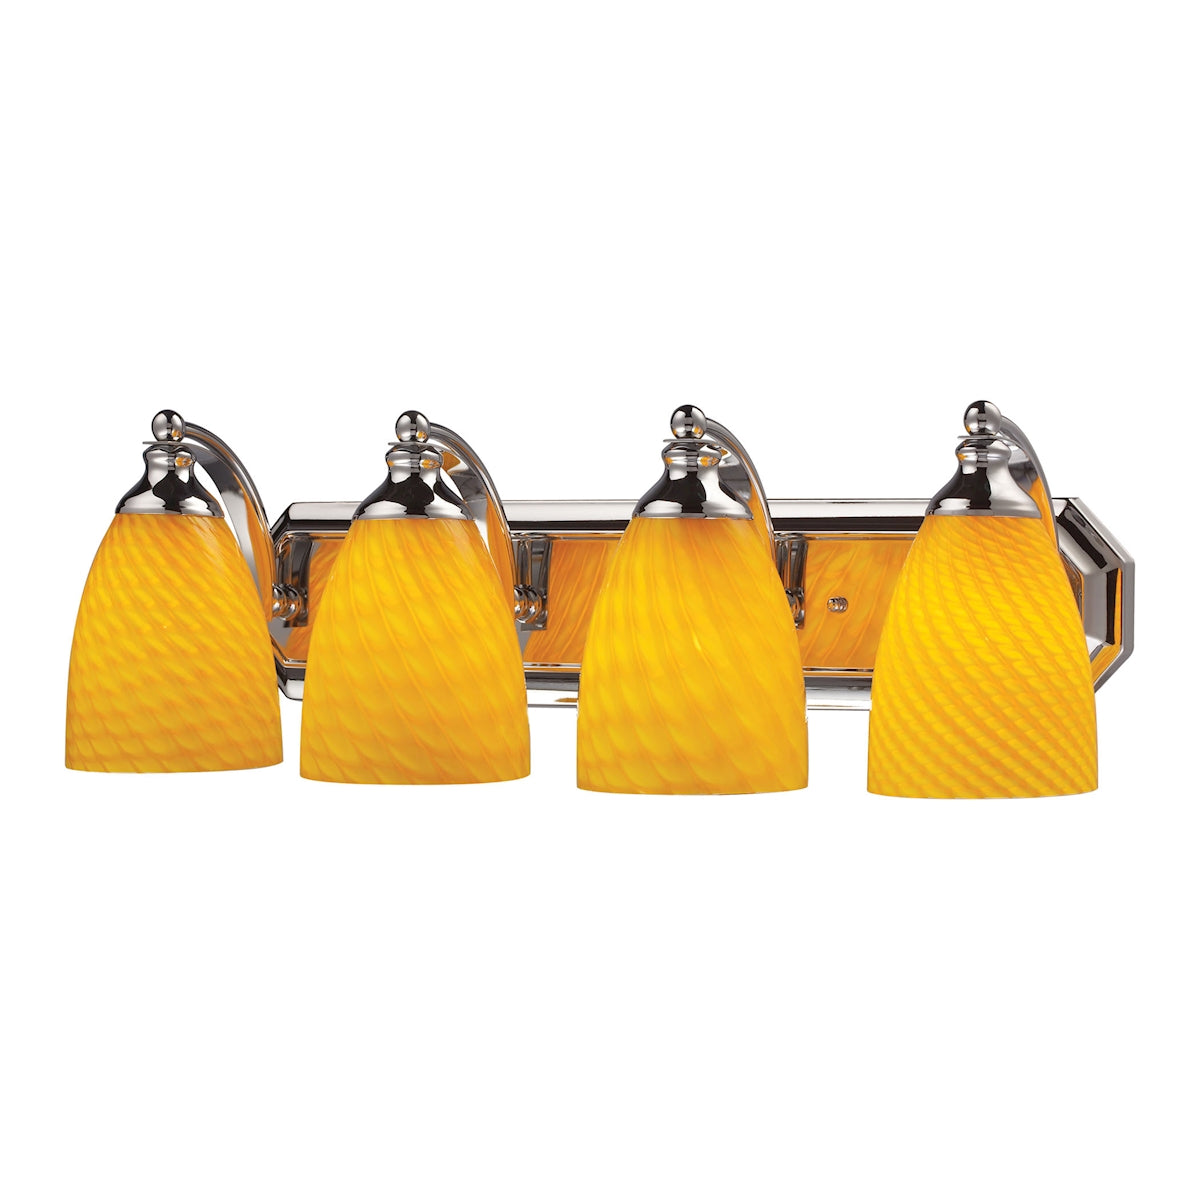 ELK Lighting 570-4C-CN Mix and Match Vanity 4-Light Wall Lamp in Chrome with Canary Glass